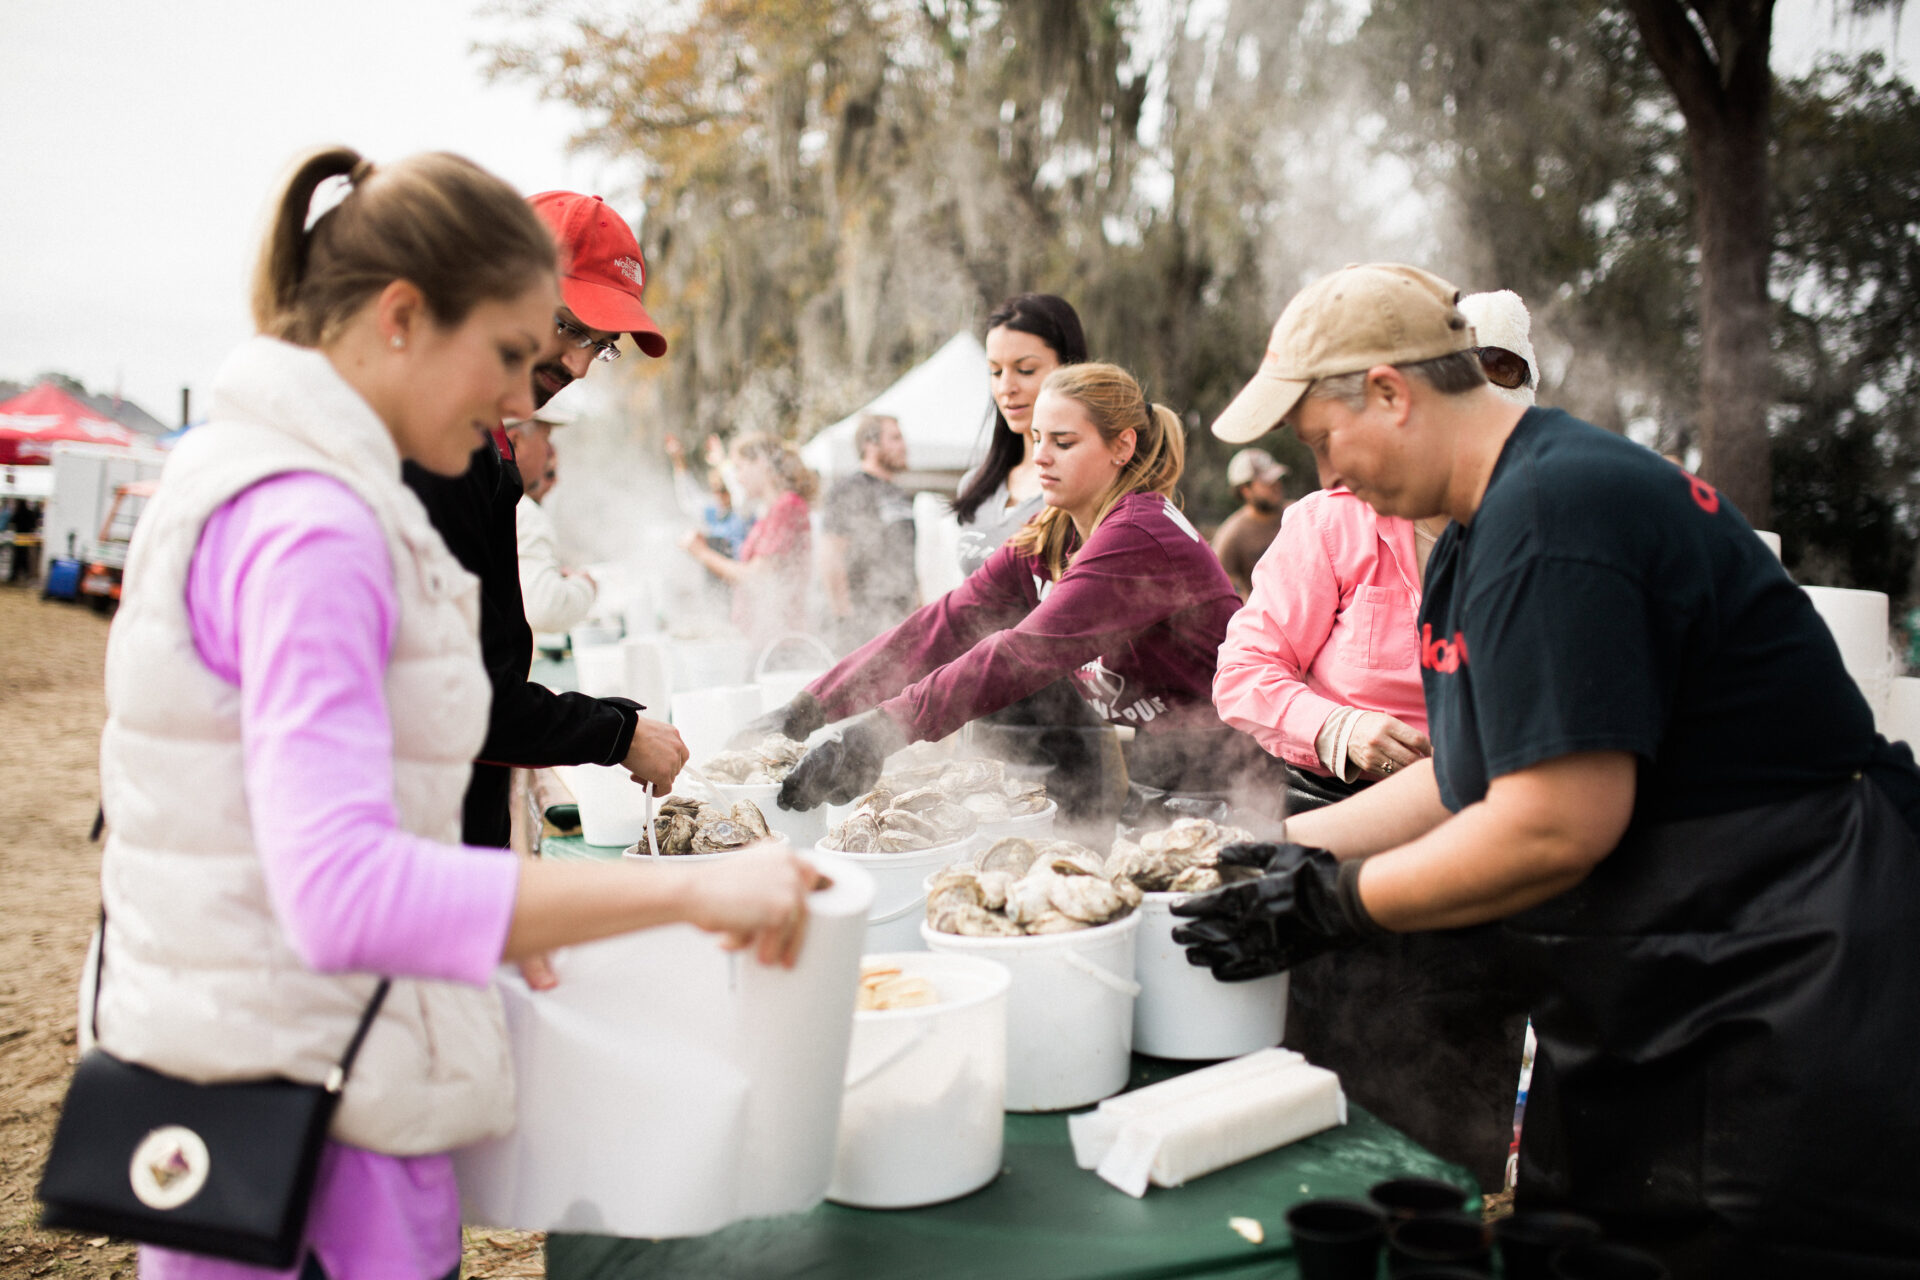 A group of people shucking oysters at the oyster festival